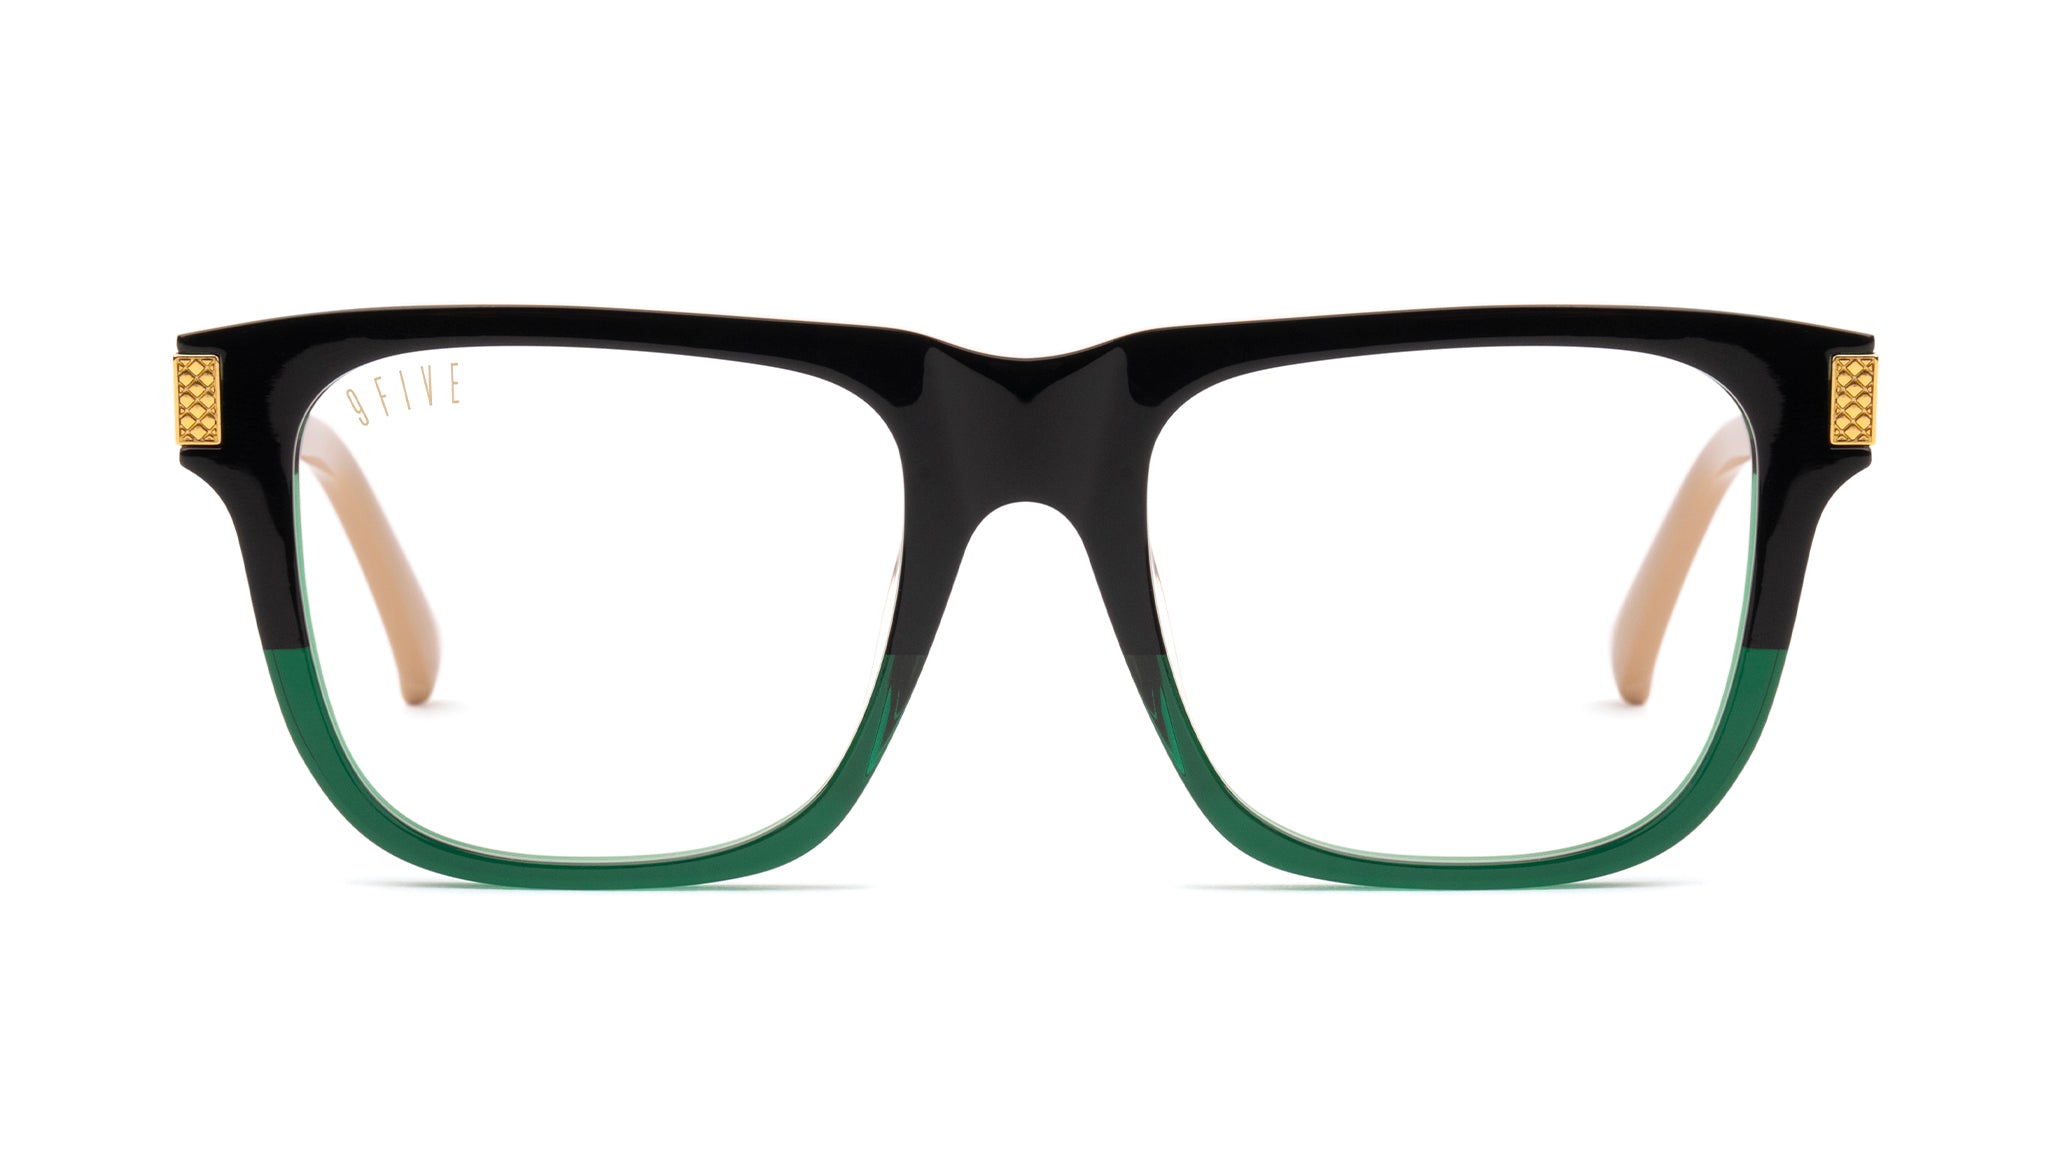 9FIVE Ocean Tundra Green Clear Lens Glasses Rx